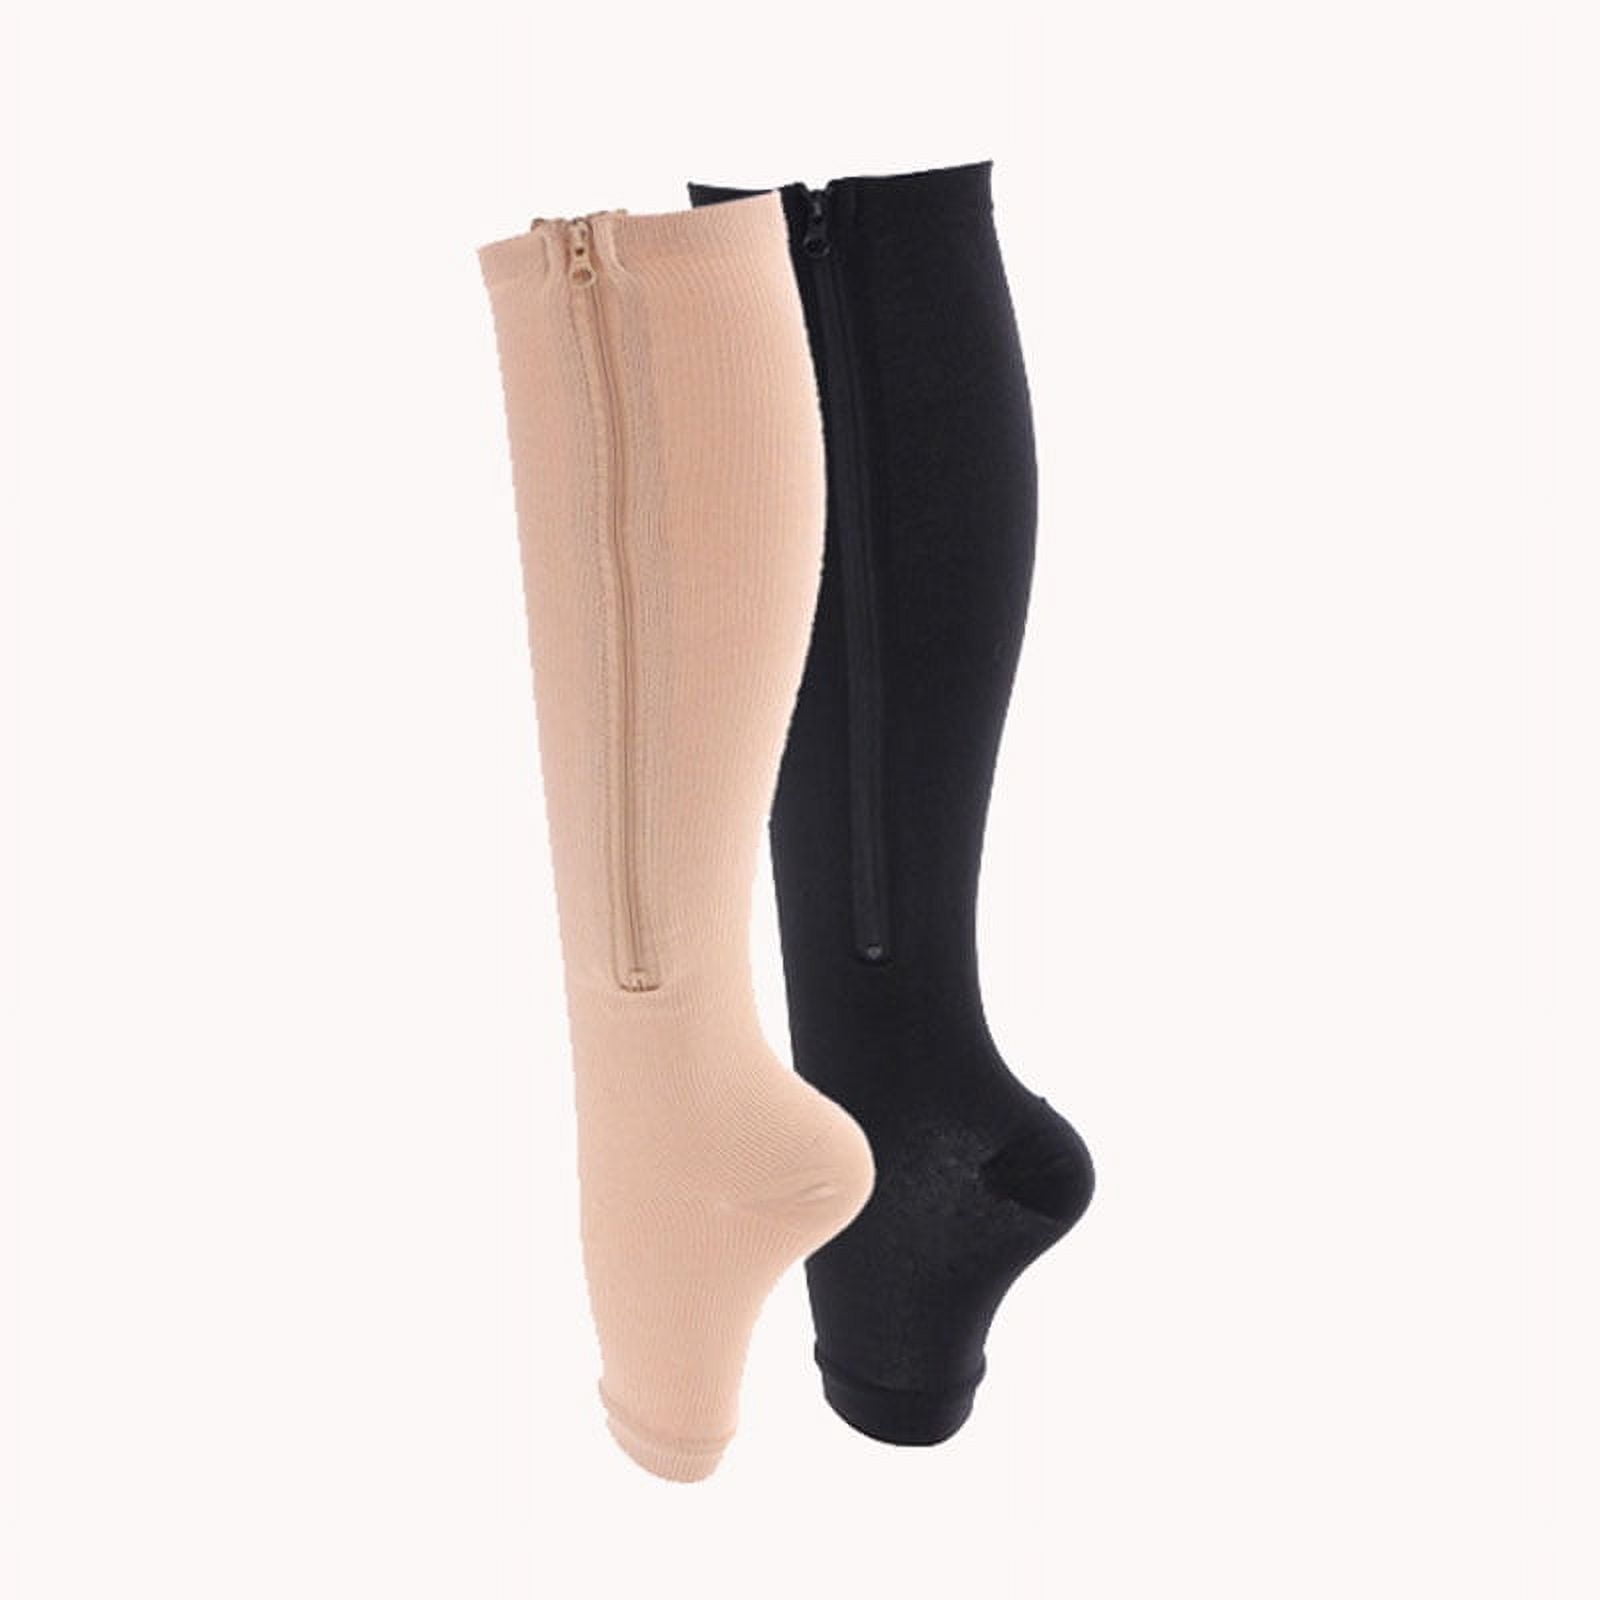 Buy Zipper Medical Compression Socks with Open Toe, best support ...